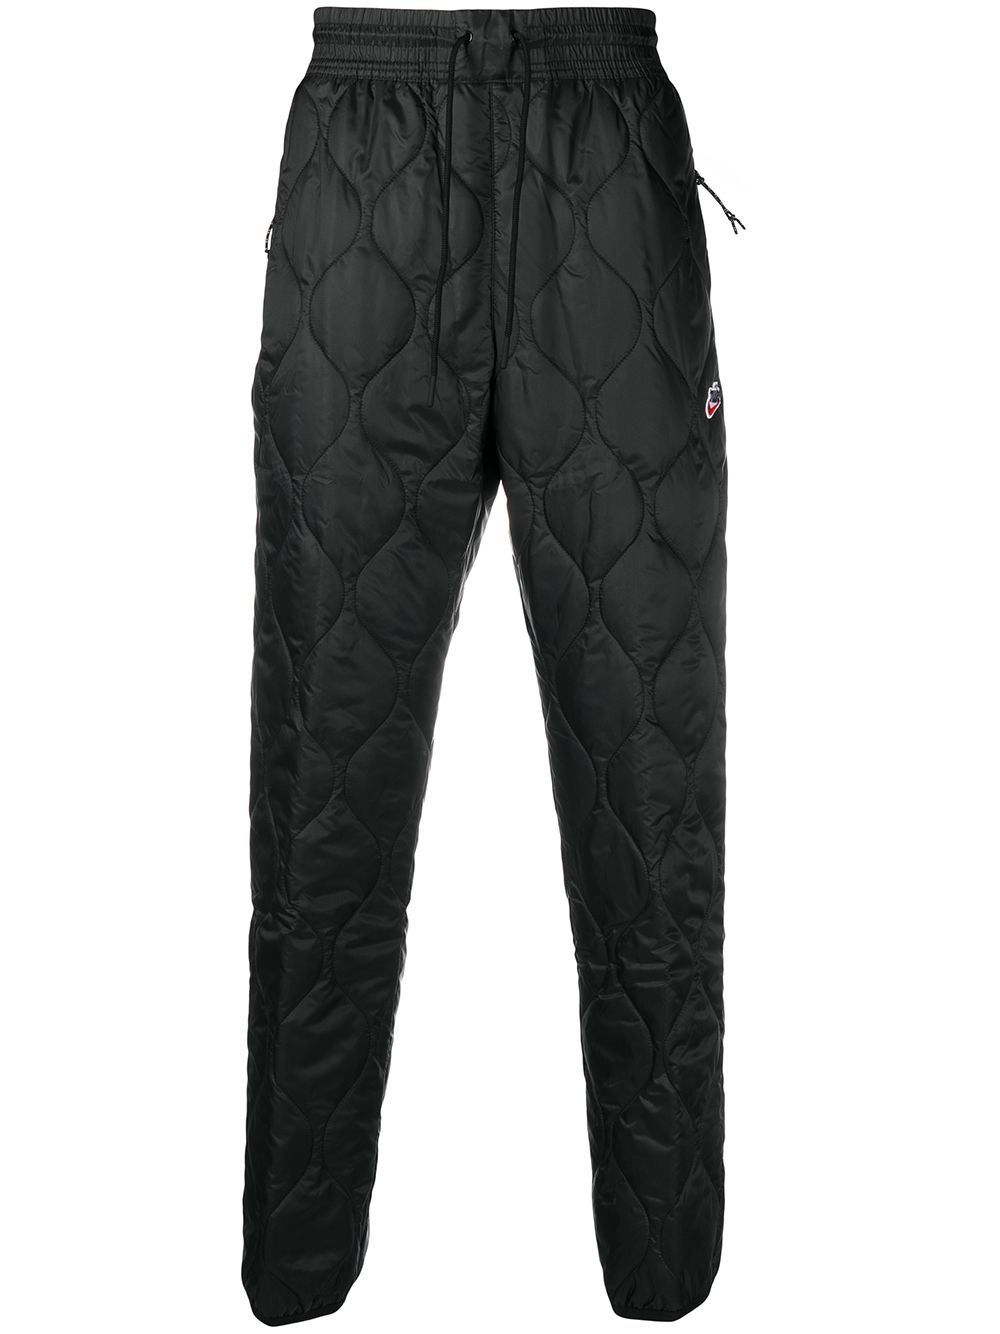 Heritage insulated trousers, Nike